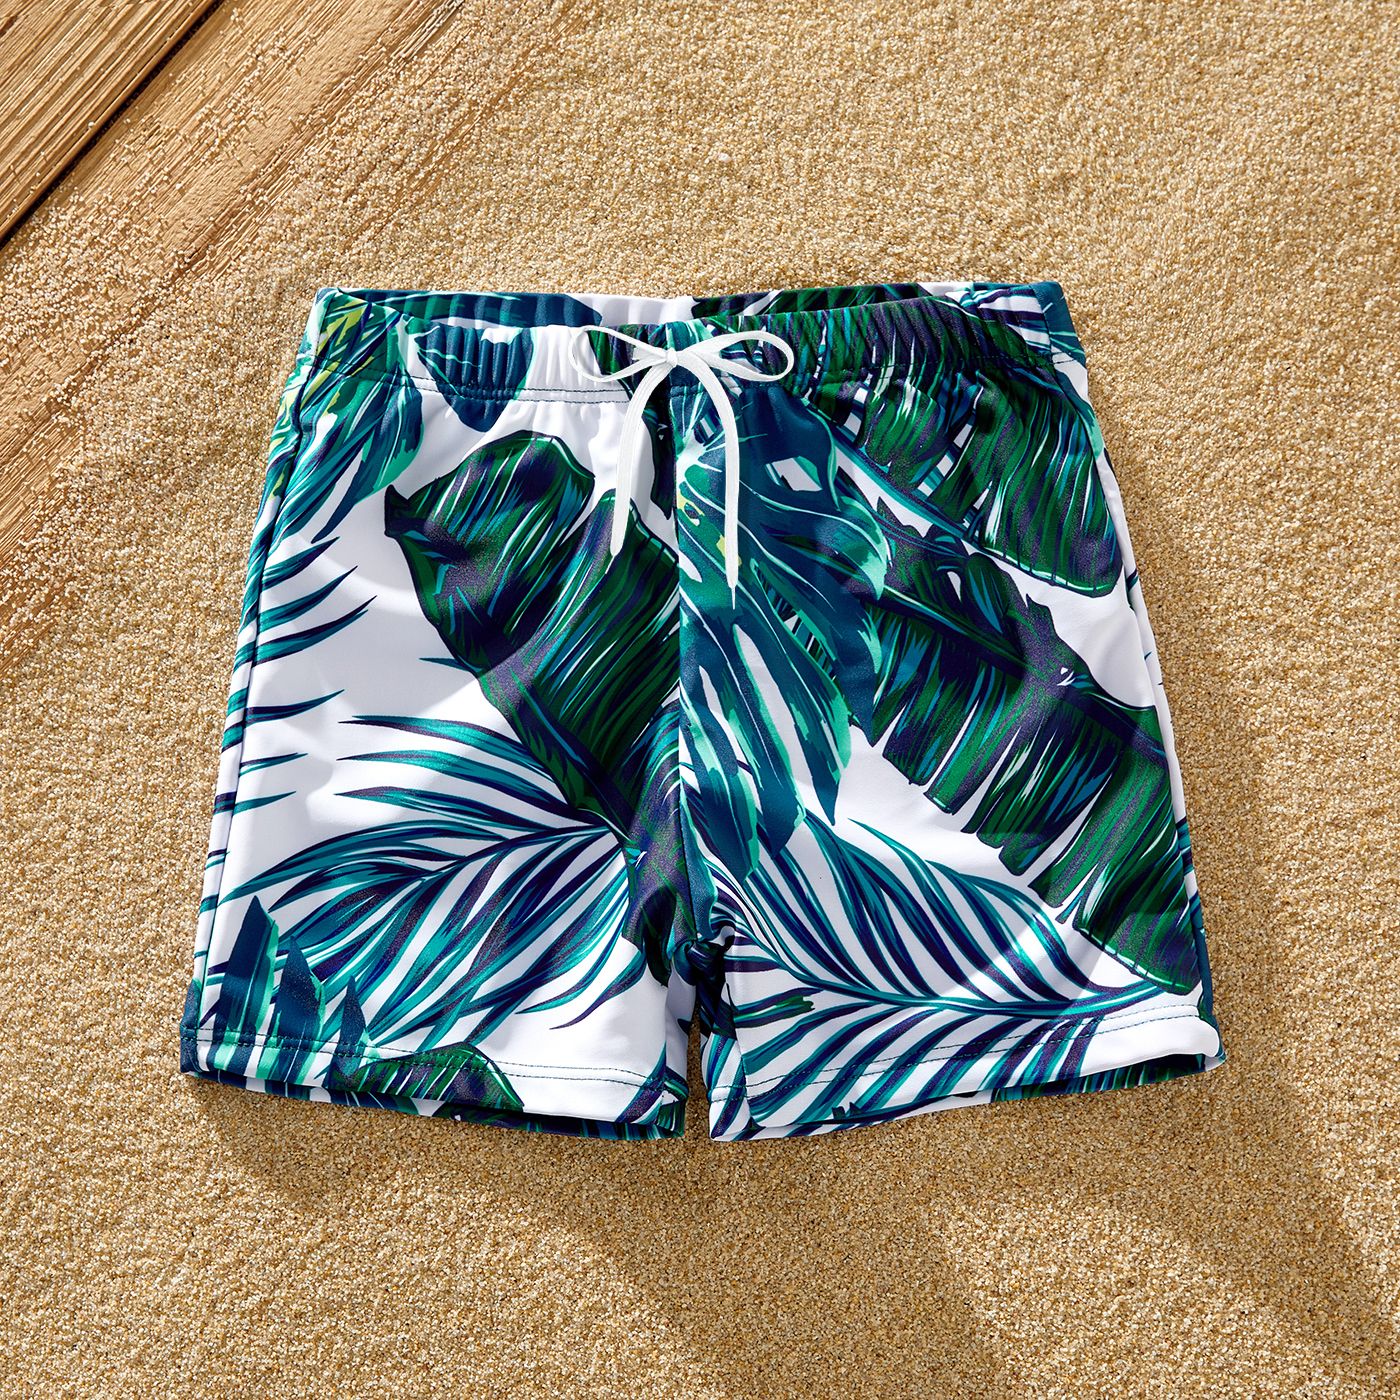 Family Matching Allover Palm Leaf Print Crisscross One-piece Swimsuit And Swim Trunks